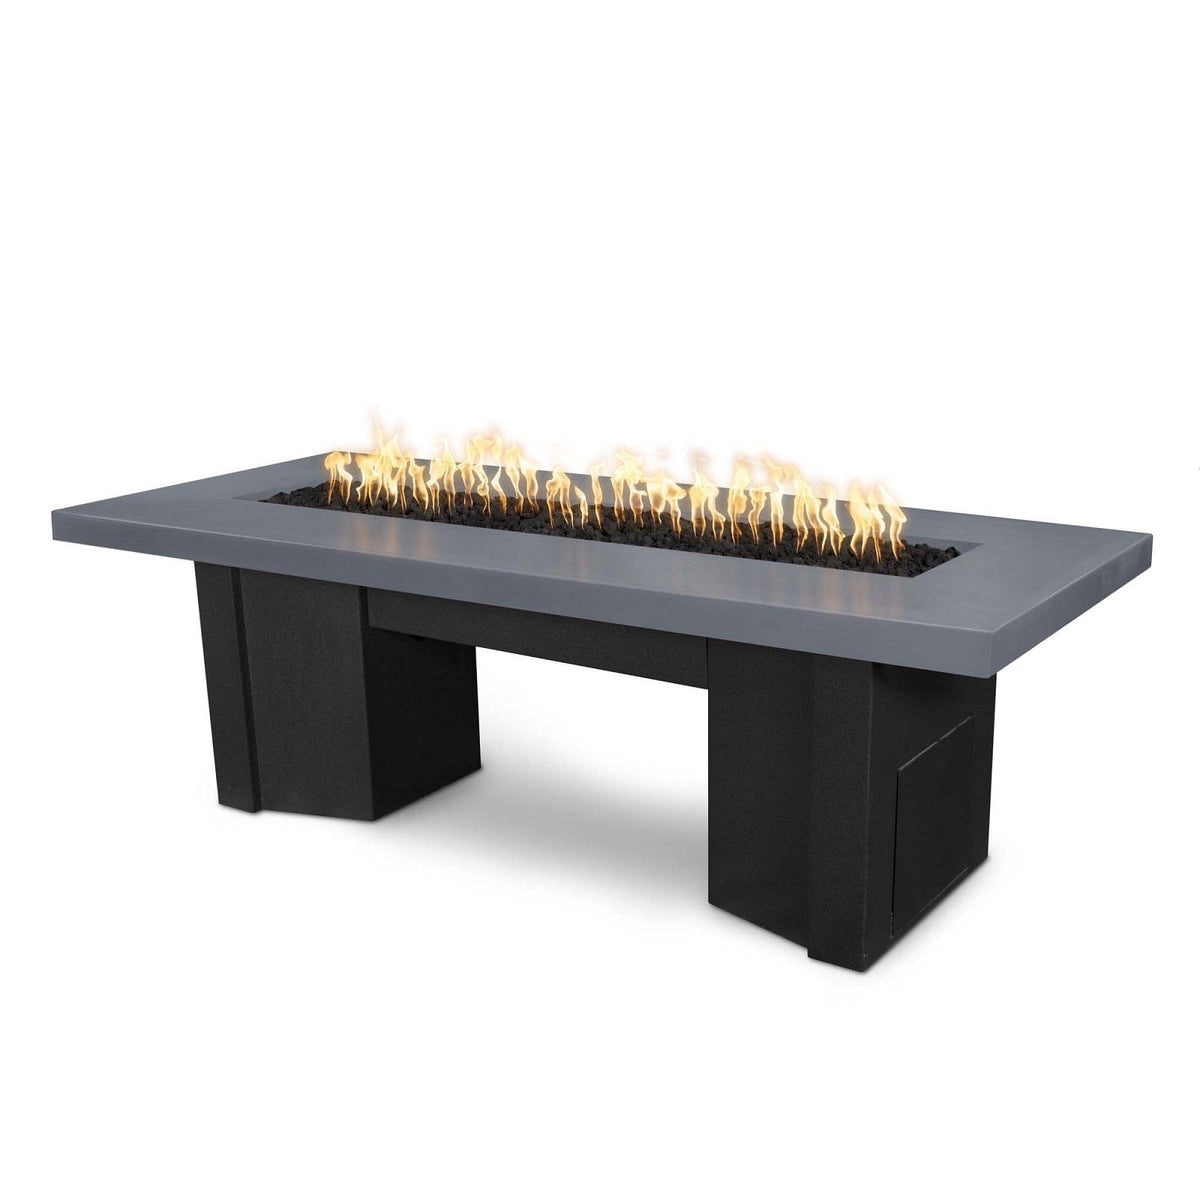 The Outdoor Plus Fire Features Gray (-GRY) / Black Powder Coated Steel (-BLK) The Outdoor Plus 60&quot; Alameda Fire Table Smooth Concrete in Natural Gas - Flame Sense System with Push Button Spark Igniter / OPT-ALMGFRC60FSEN-NG